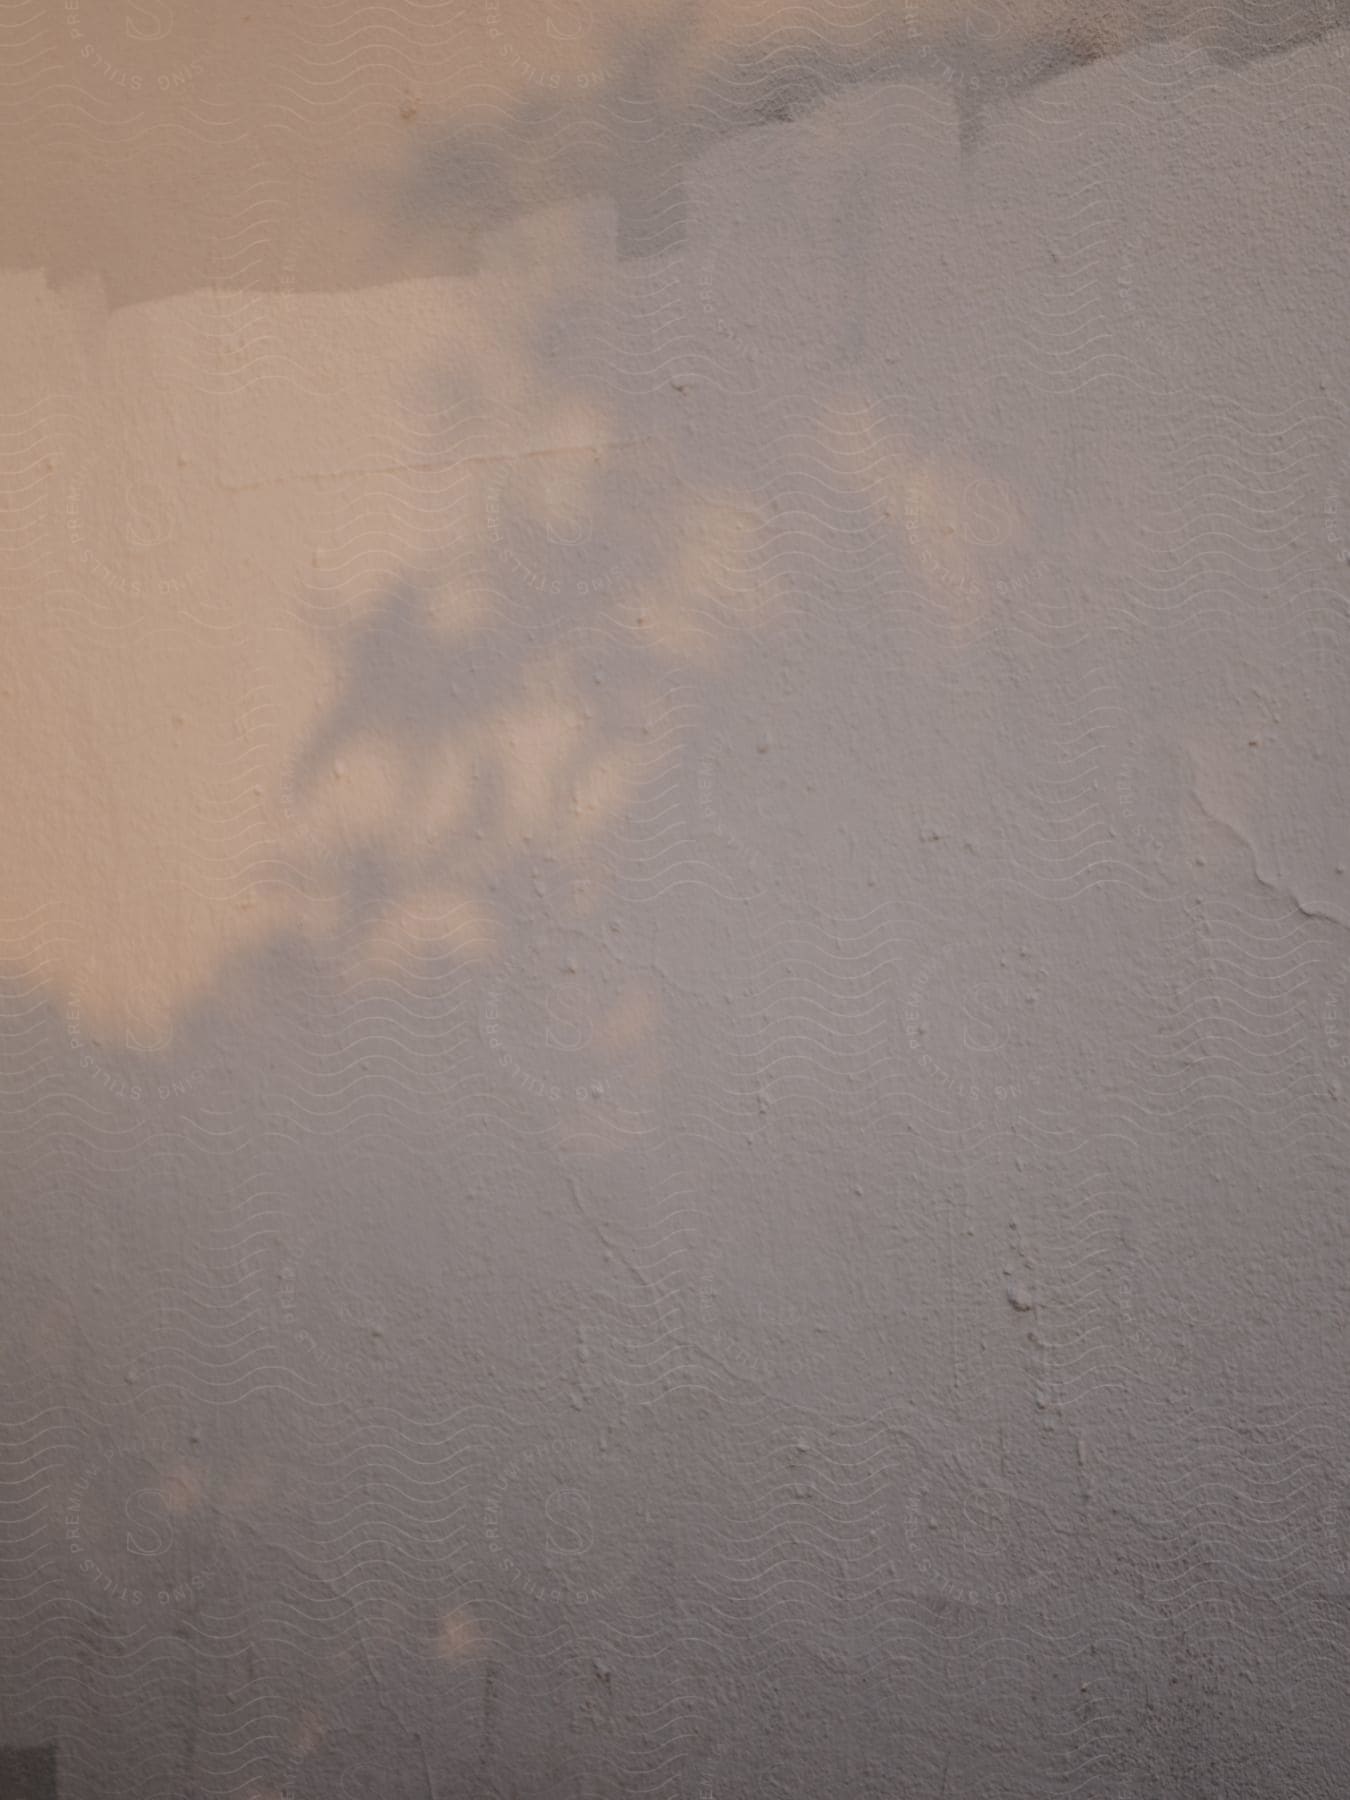 Architecture of a light-toned wall with sunlight reflection.